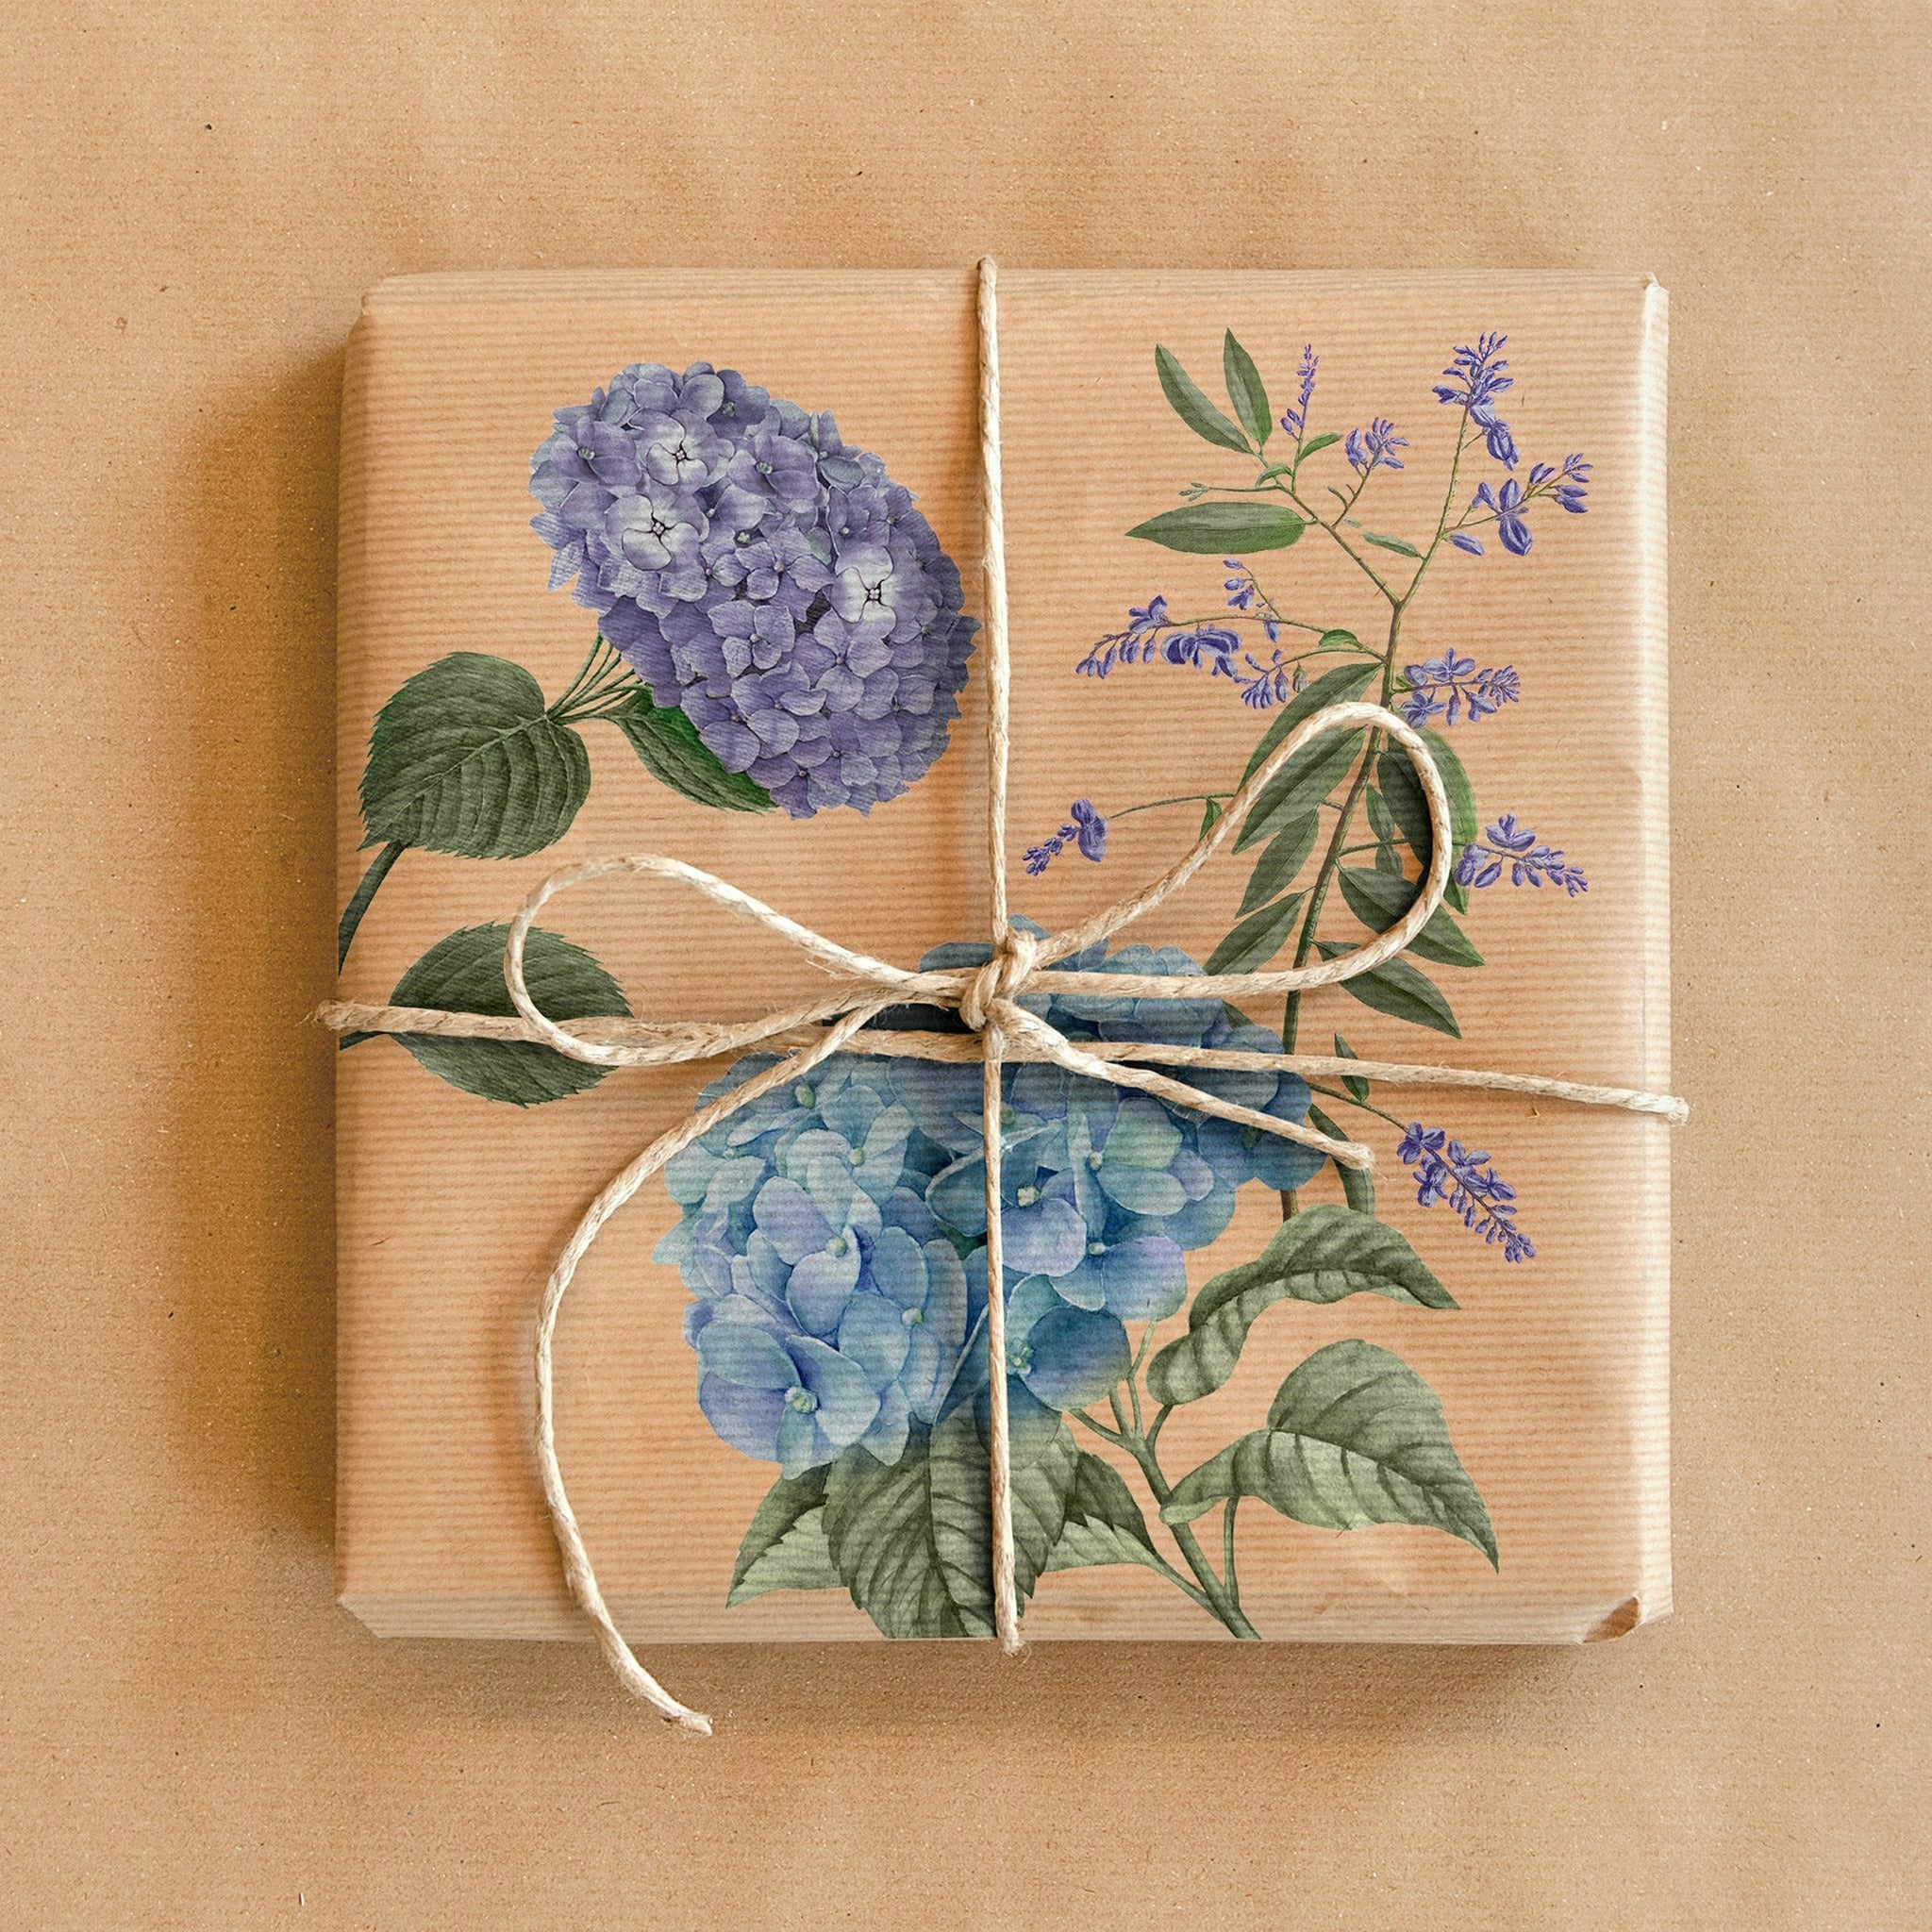 Wrapped present with the Mystic Hydrangea on transfer on top.